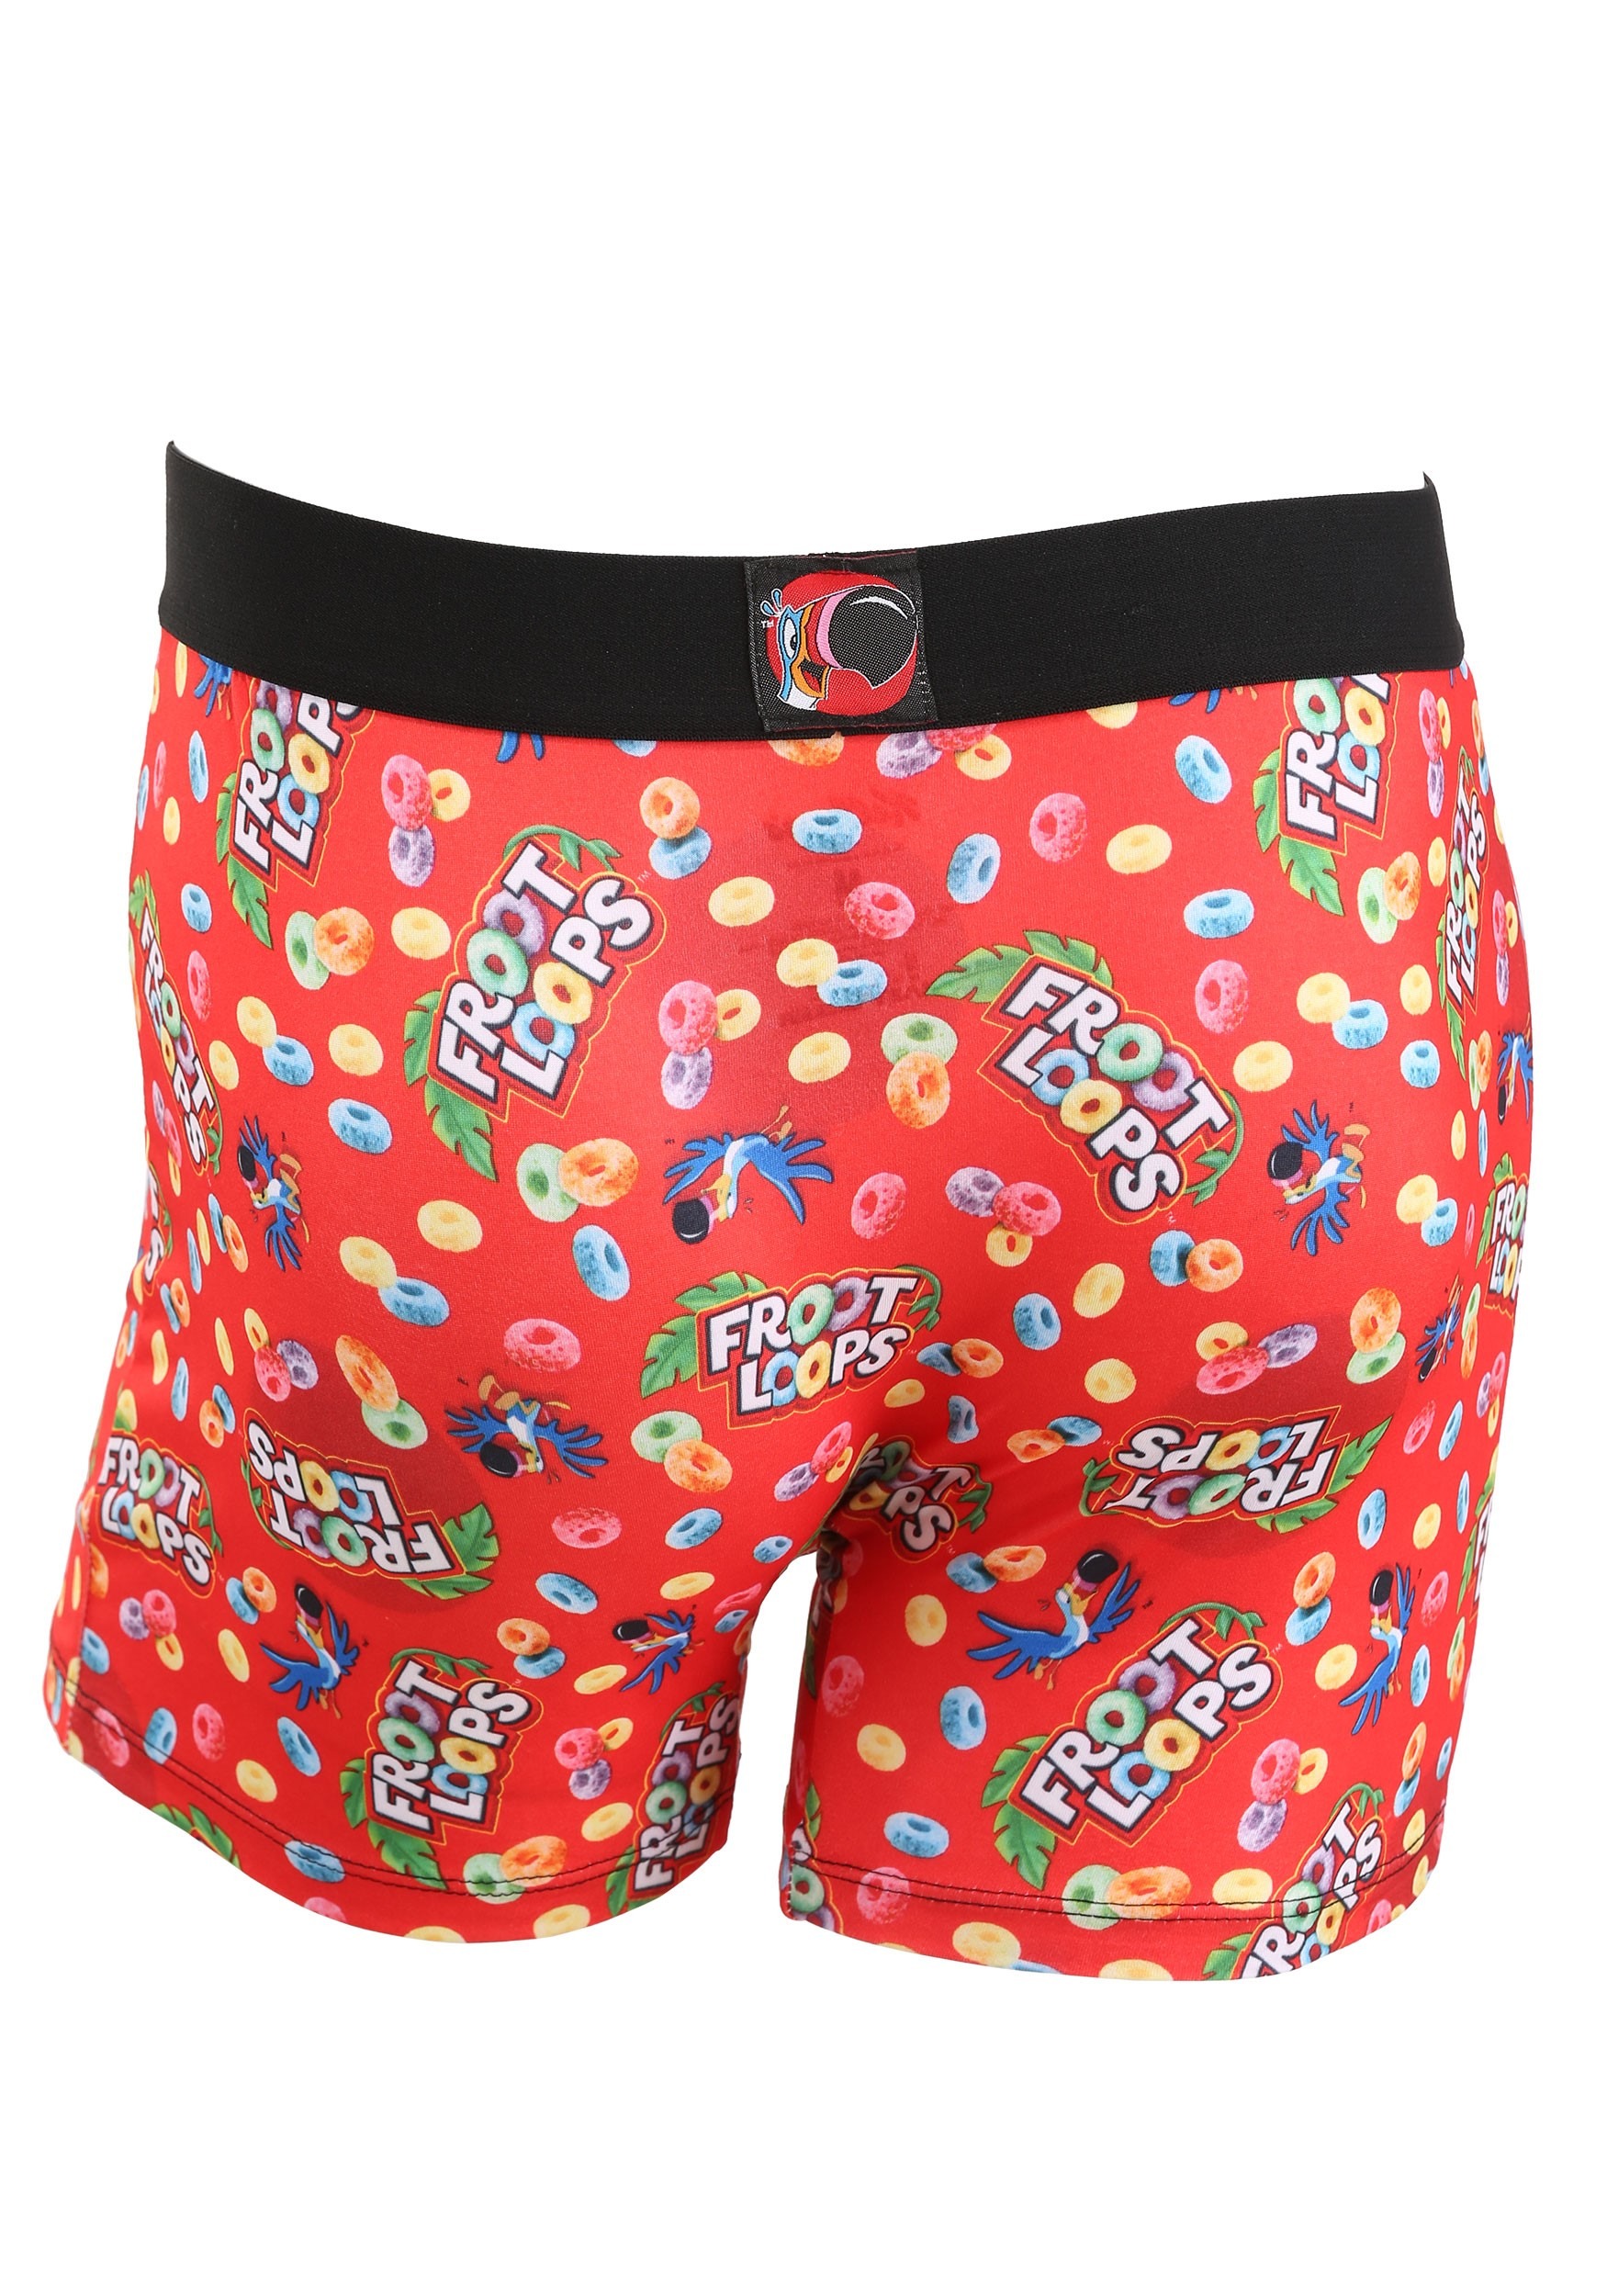 Mens Crazy Boxers Froot Loops Red/White Boxer Briefs 